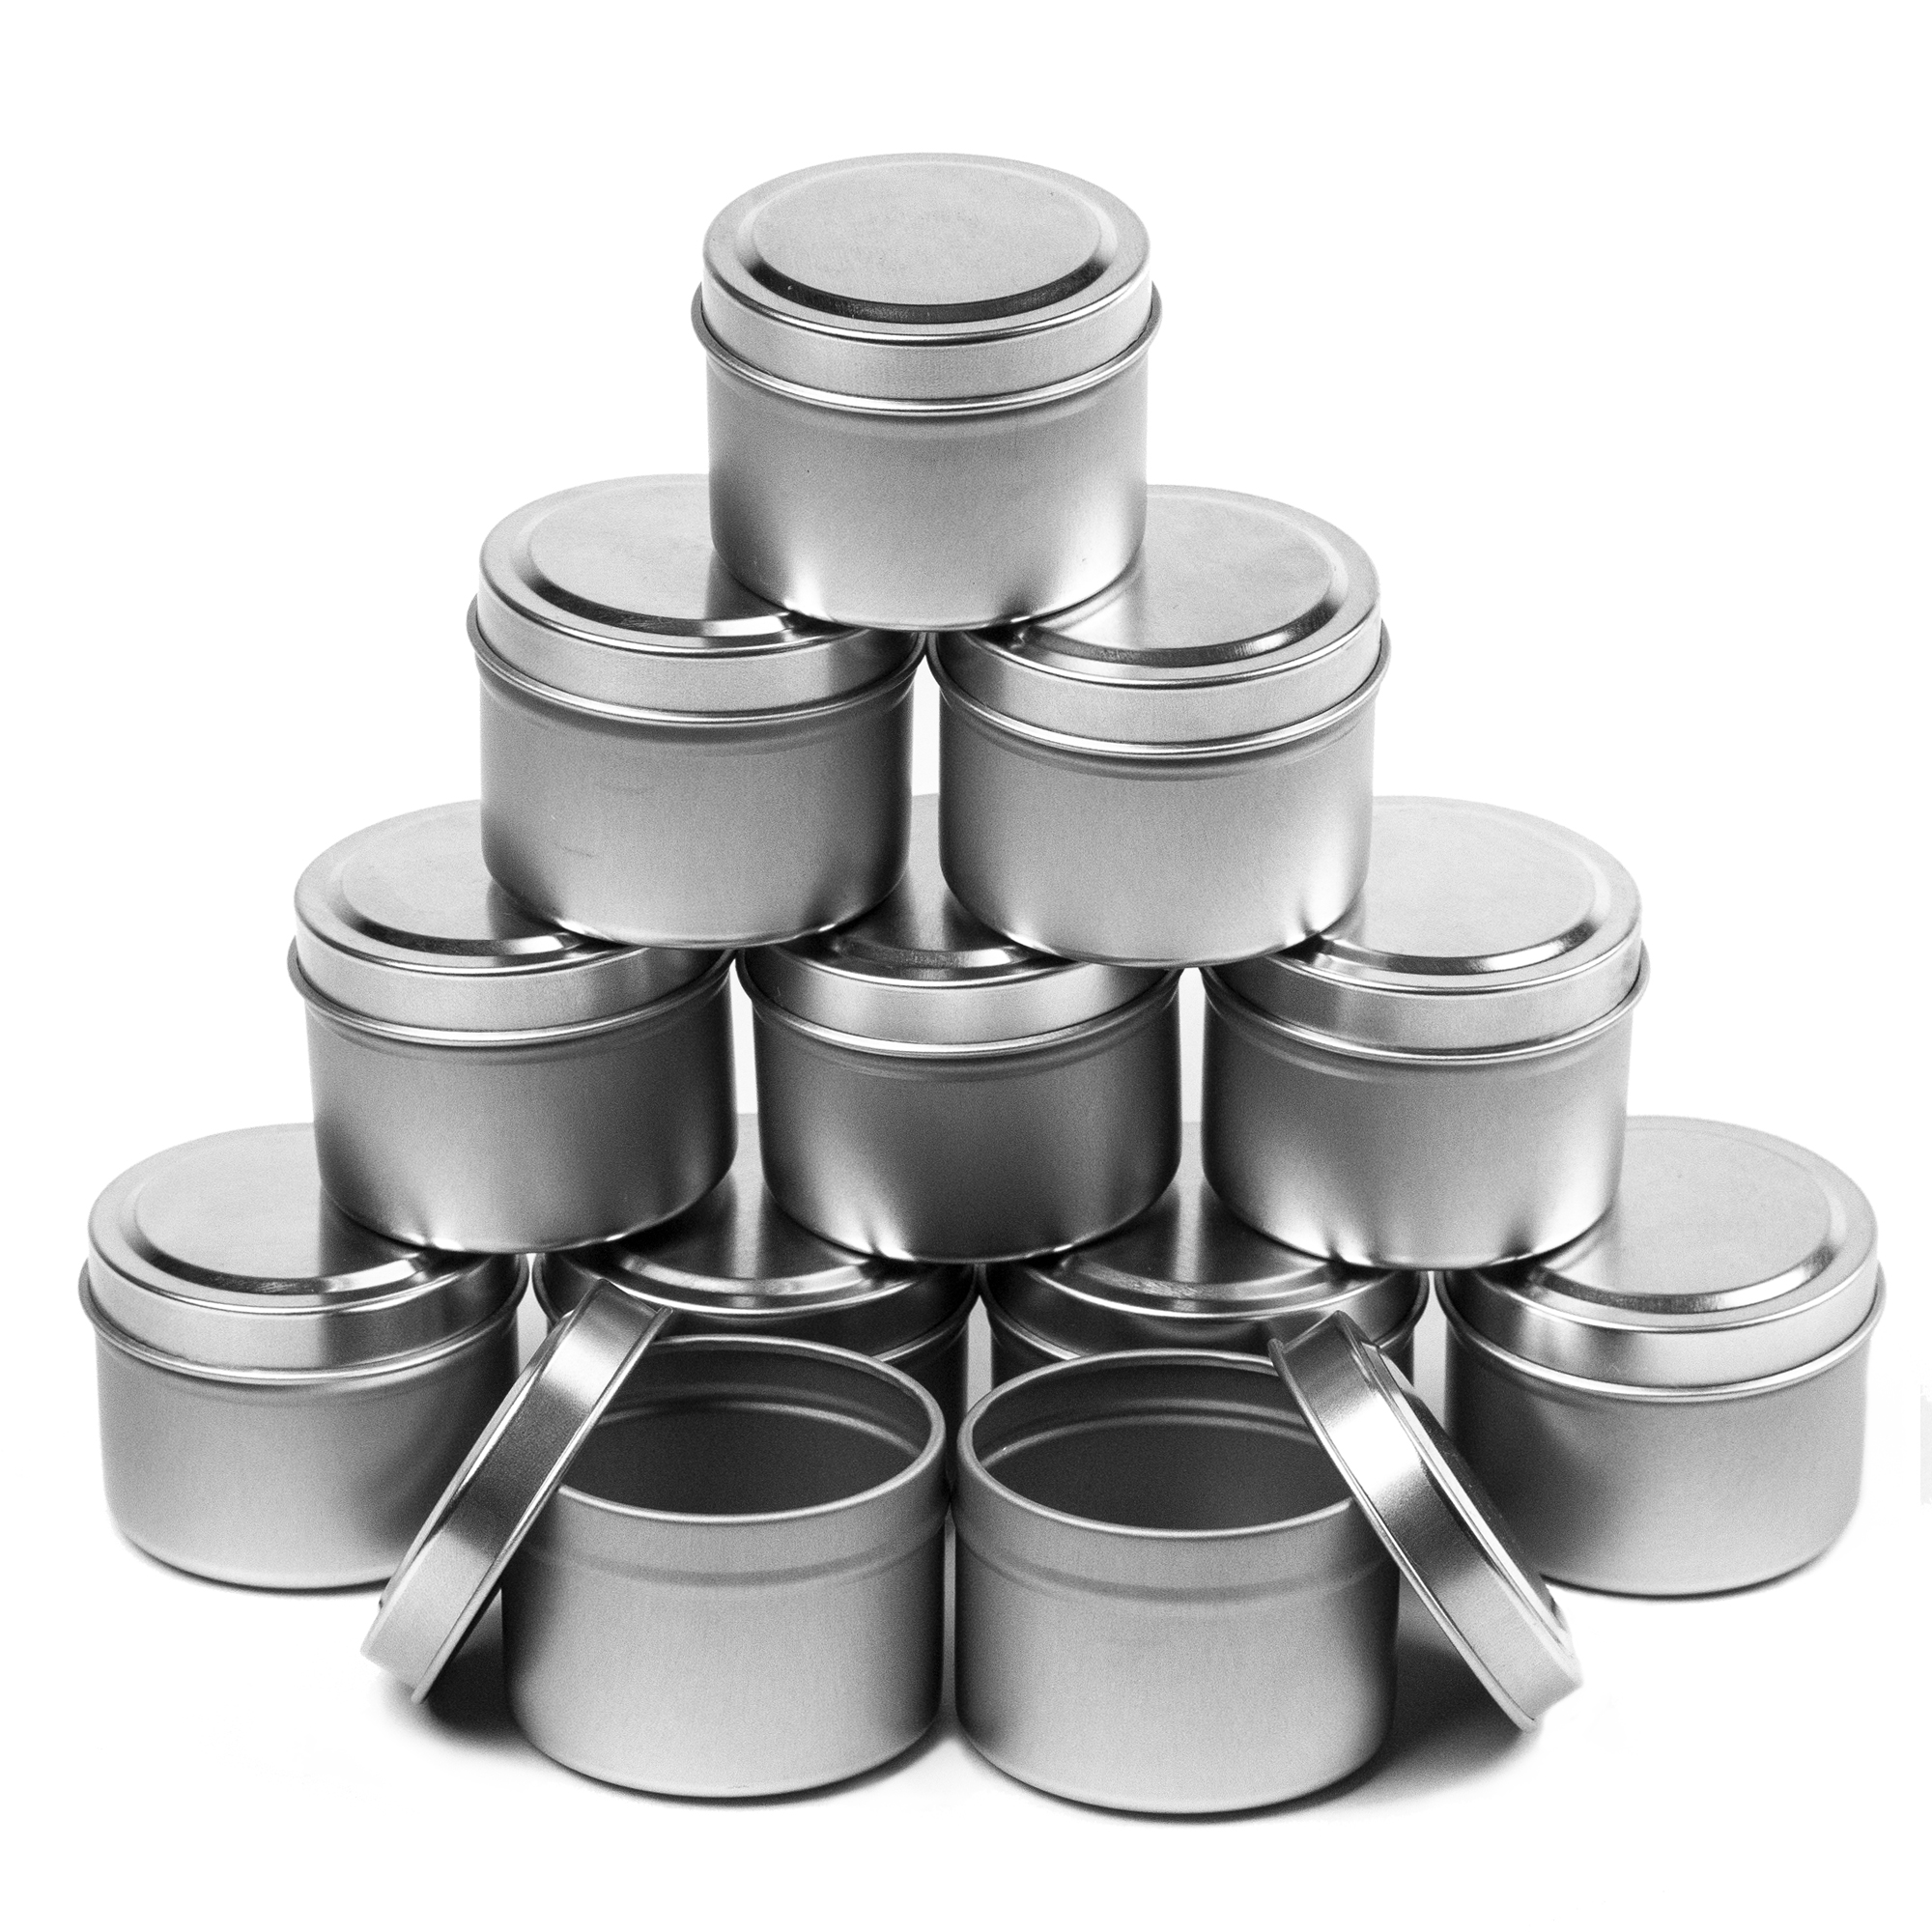 https://d3hvfybcx3z7iq.cloudfront.net/2oz-Candle-Tin-Containers-12-pc-case.jpg